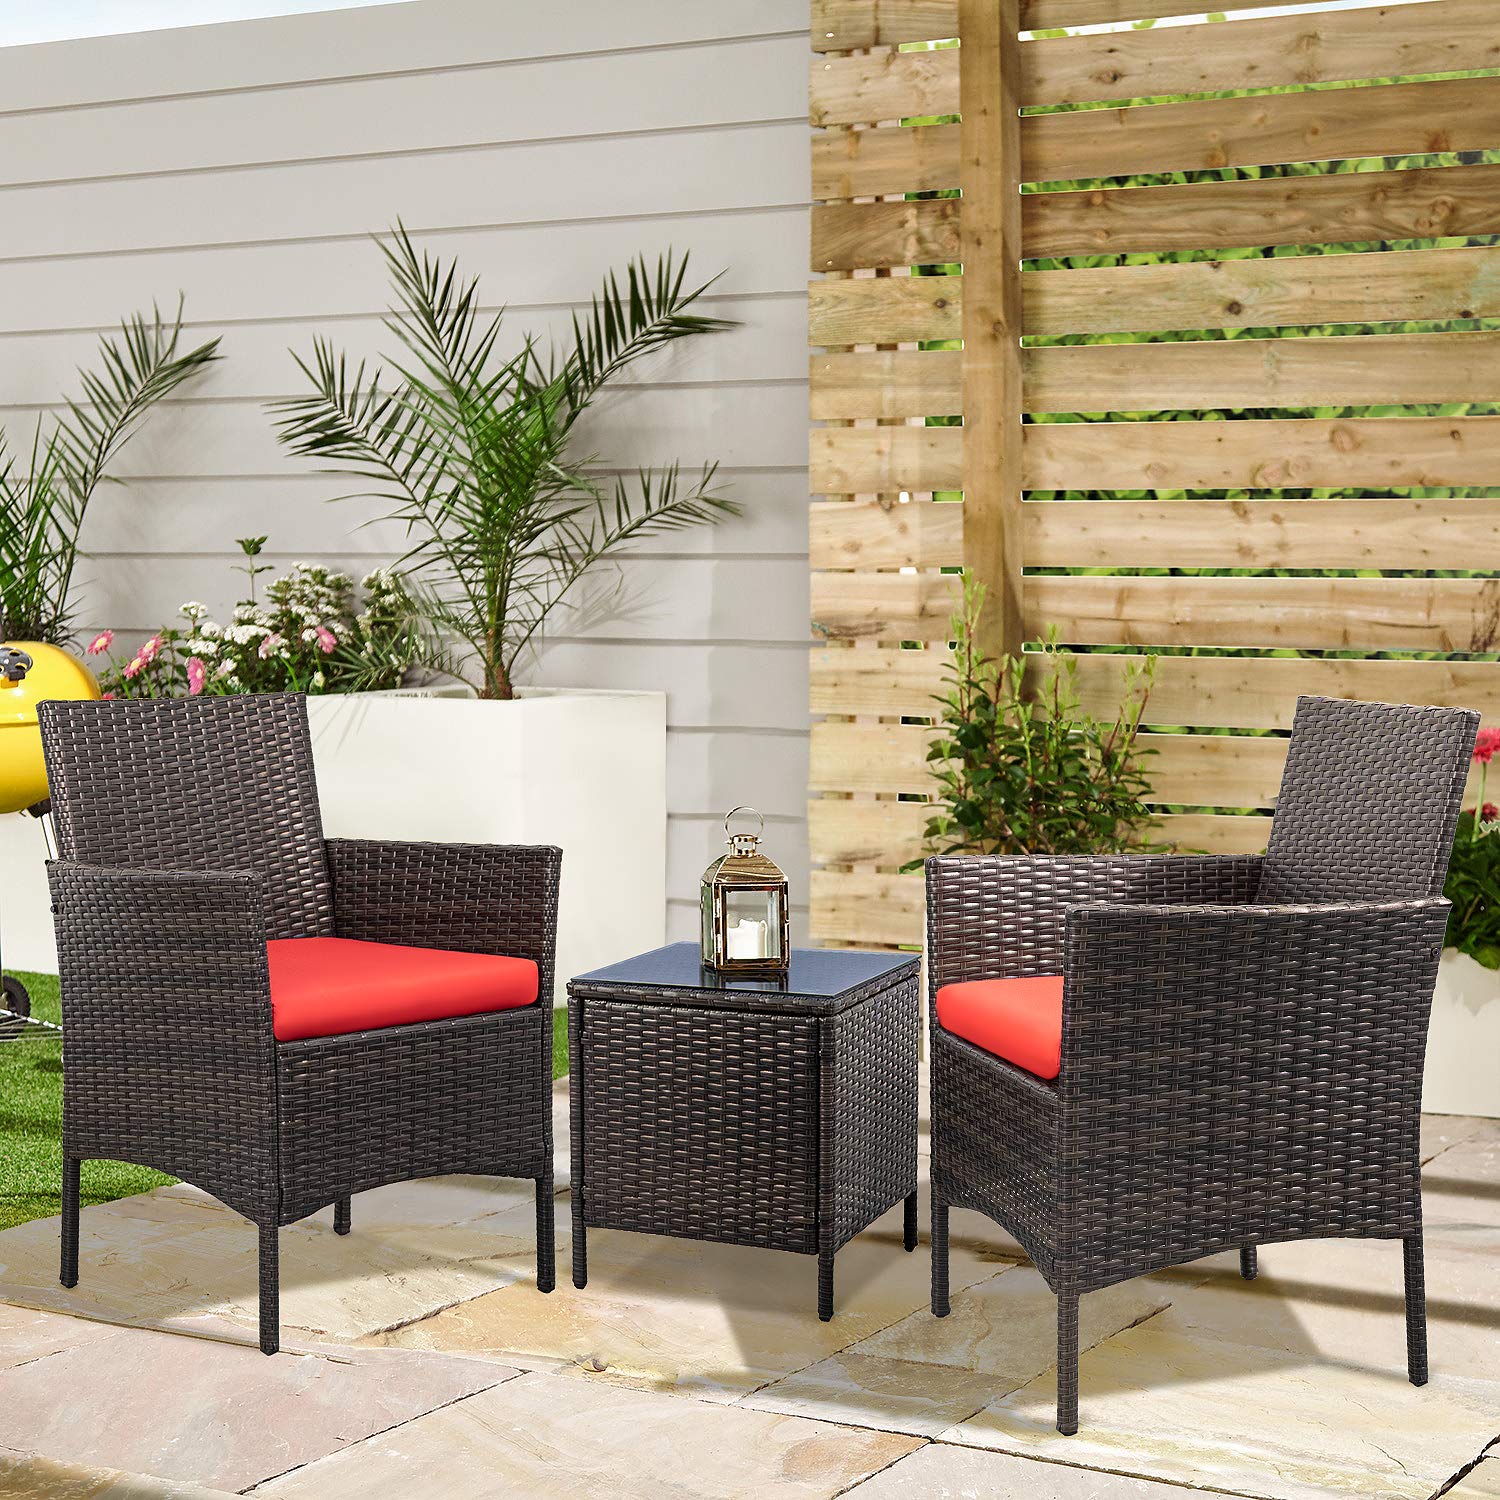 Lacoo 3 Pcs 2 Seater Outdoor Patio Furniture PE Rattan Wicker Table and Chairs Set with Cushioned Tempered Glass (Brown/Red) - image 1 of 6